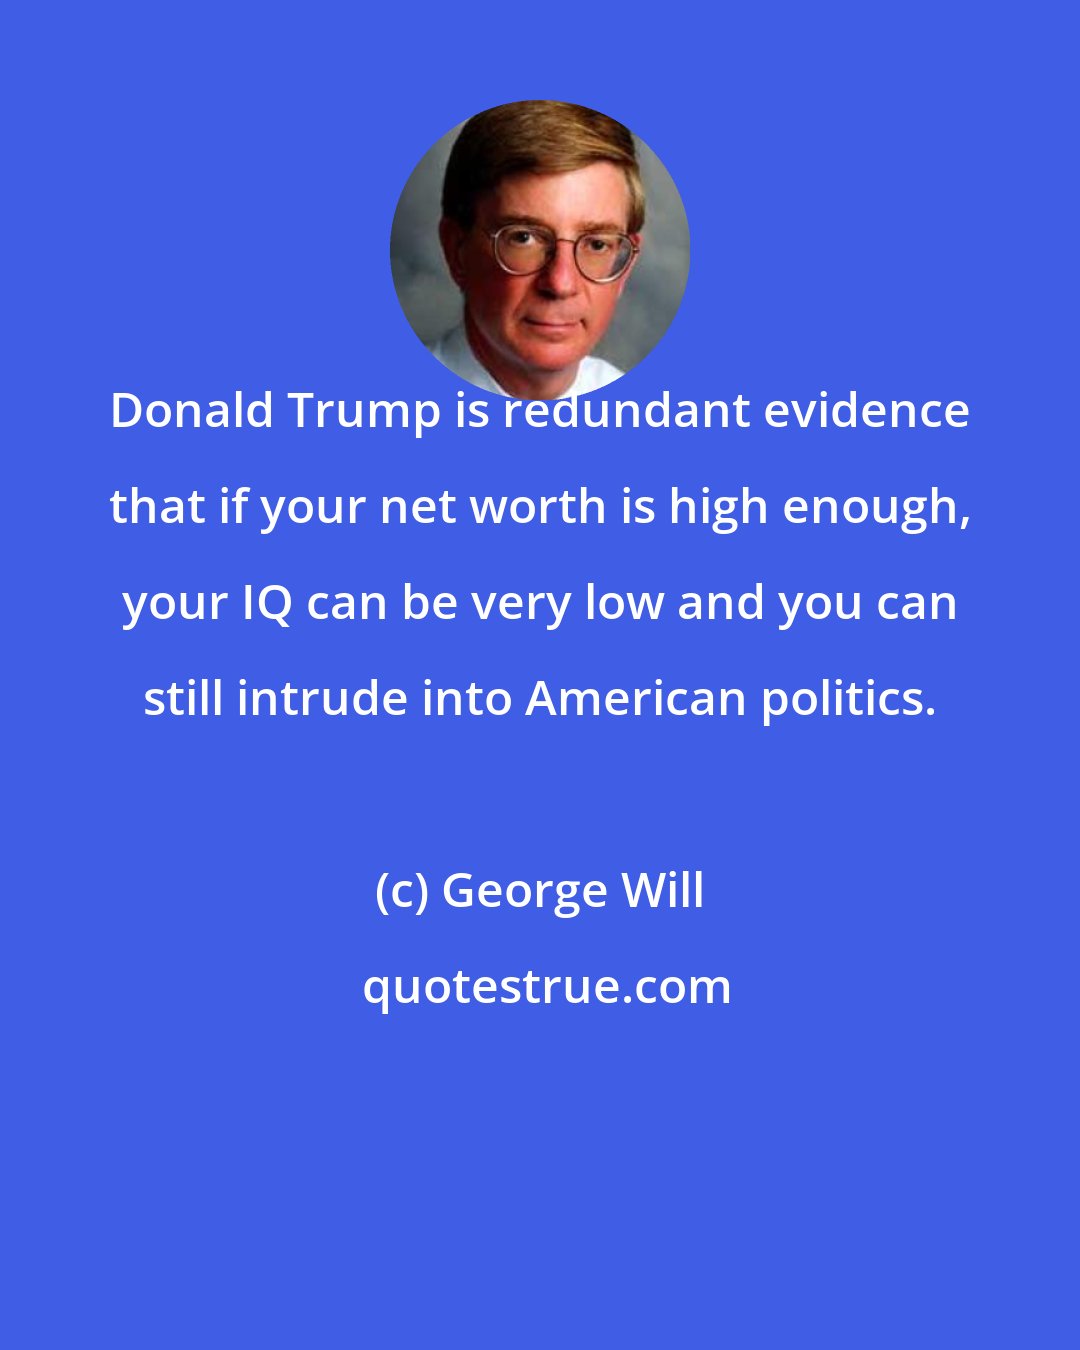 George Will: Donald Trump is redundant evidence that if your net worth is high enough, your IQ can be very low and you can still intrude into American politics.